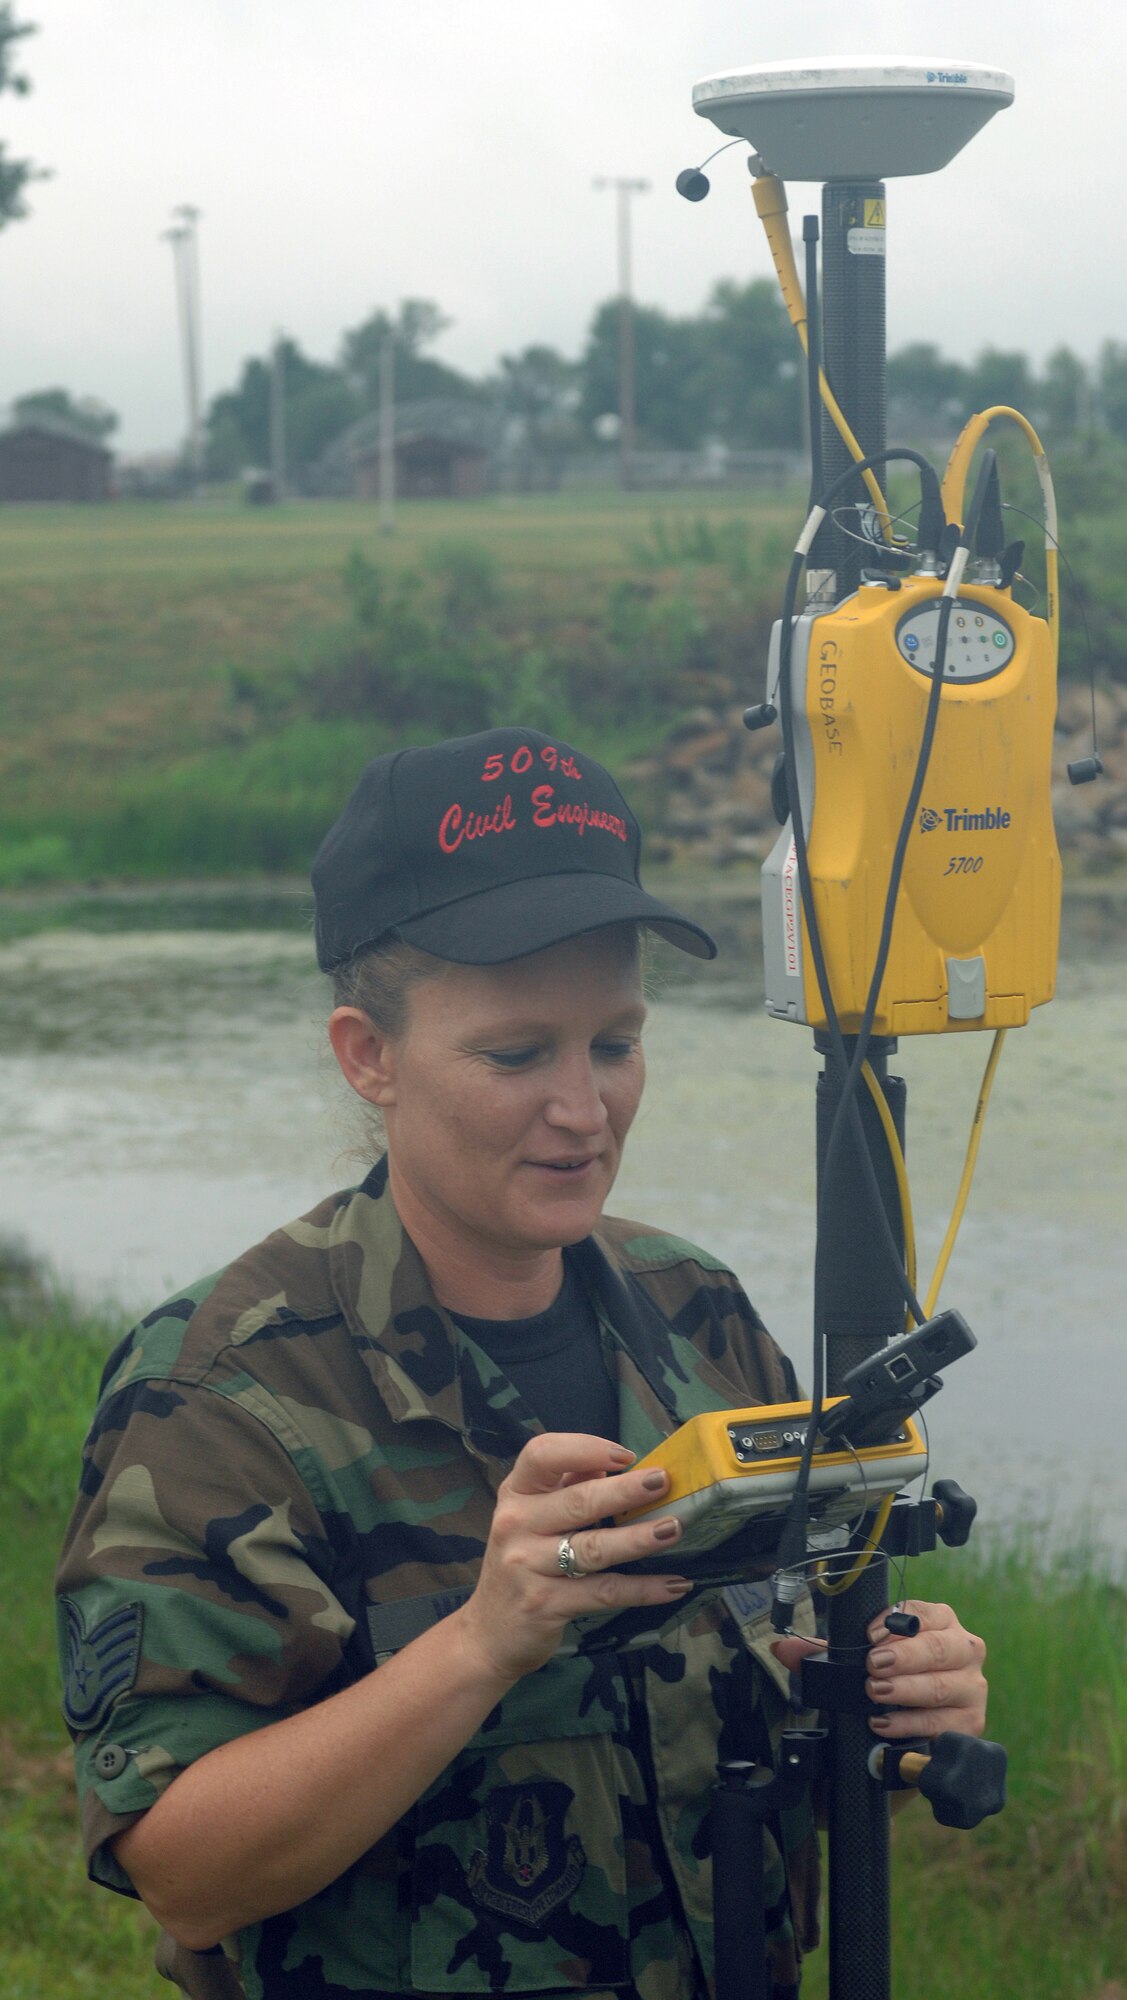 WHITEMAN AIR FORCE BASE, Mo. --  Staff Sgt. Clara Winkler, 509th Civil Engineer Squadron, measures elevation around the base lake with GPS surveying equipment Sept. 6. Winkler is a Reservist from the 442nd Fighter Wing currently on active duty with the 509th CES. (U.S. Air Force Photo/Tech. Sgt. Samuel A. Park)